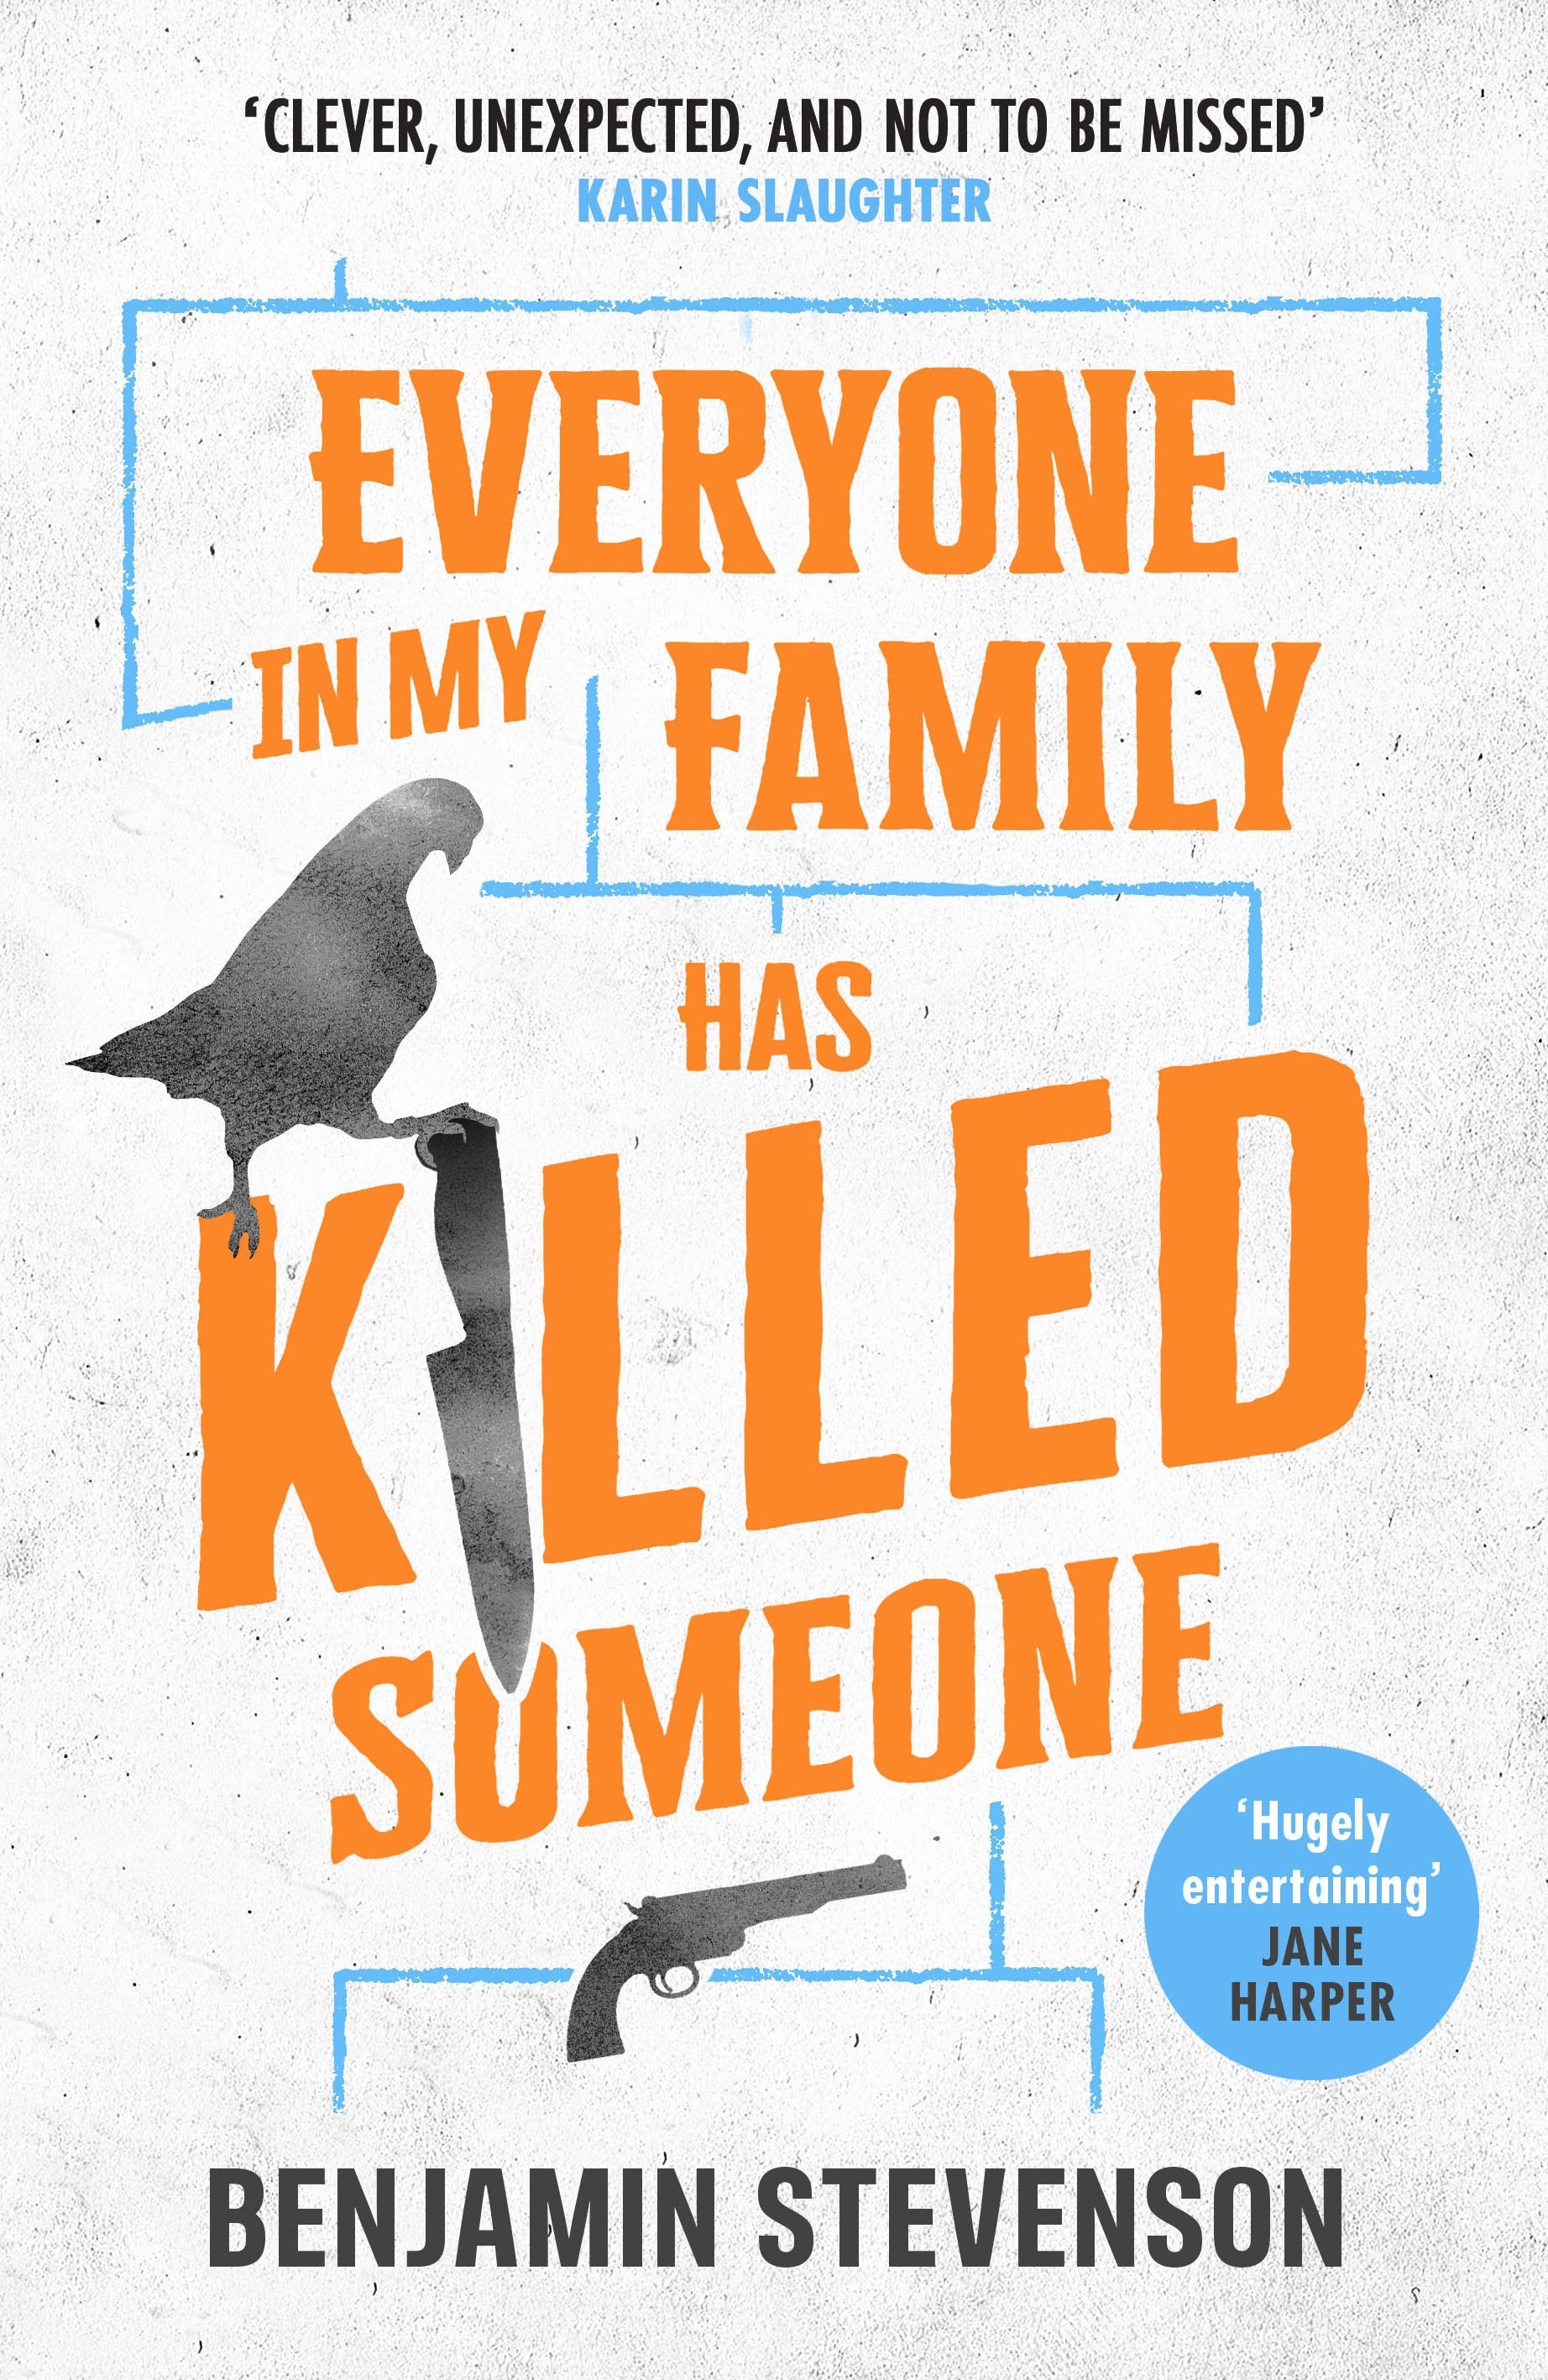 Book “Everyone In My Family Has Killed Someone” by Benjamin Stevenson — August 18, 2022